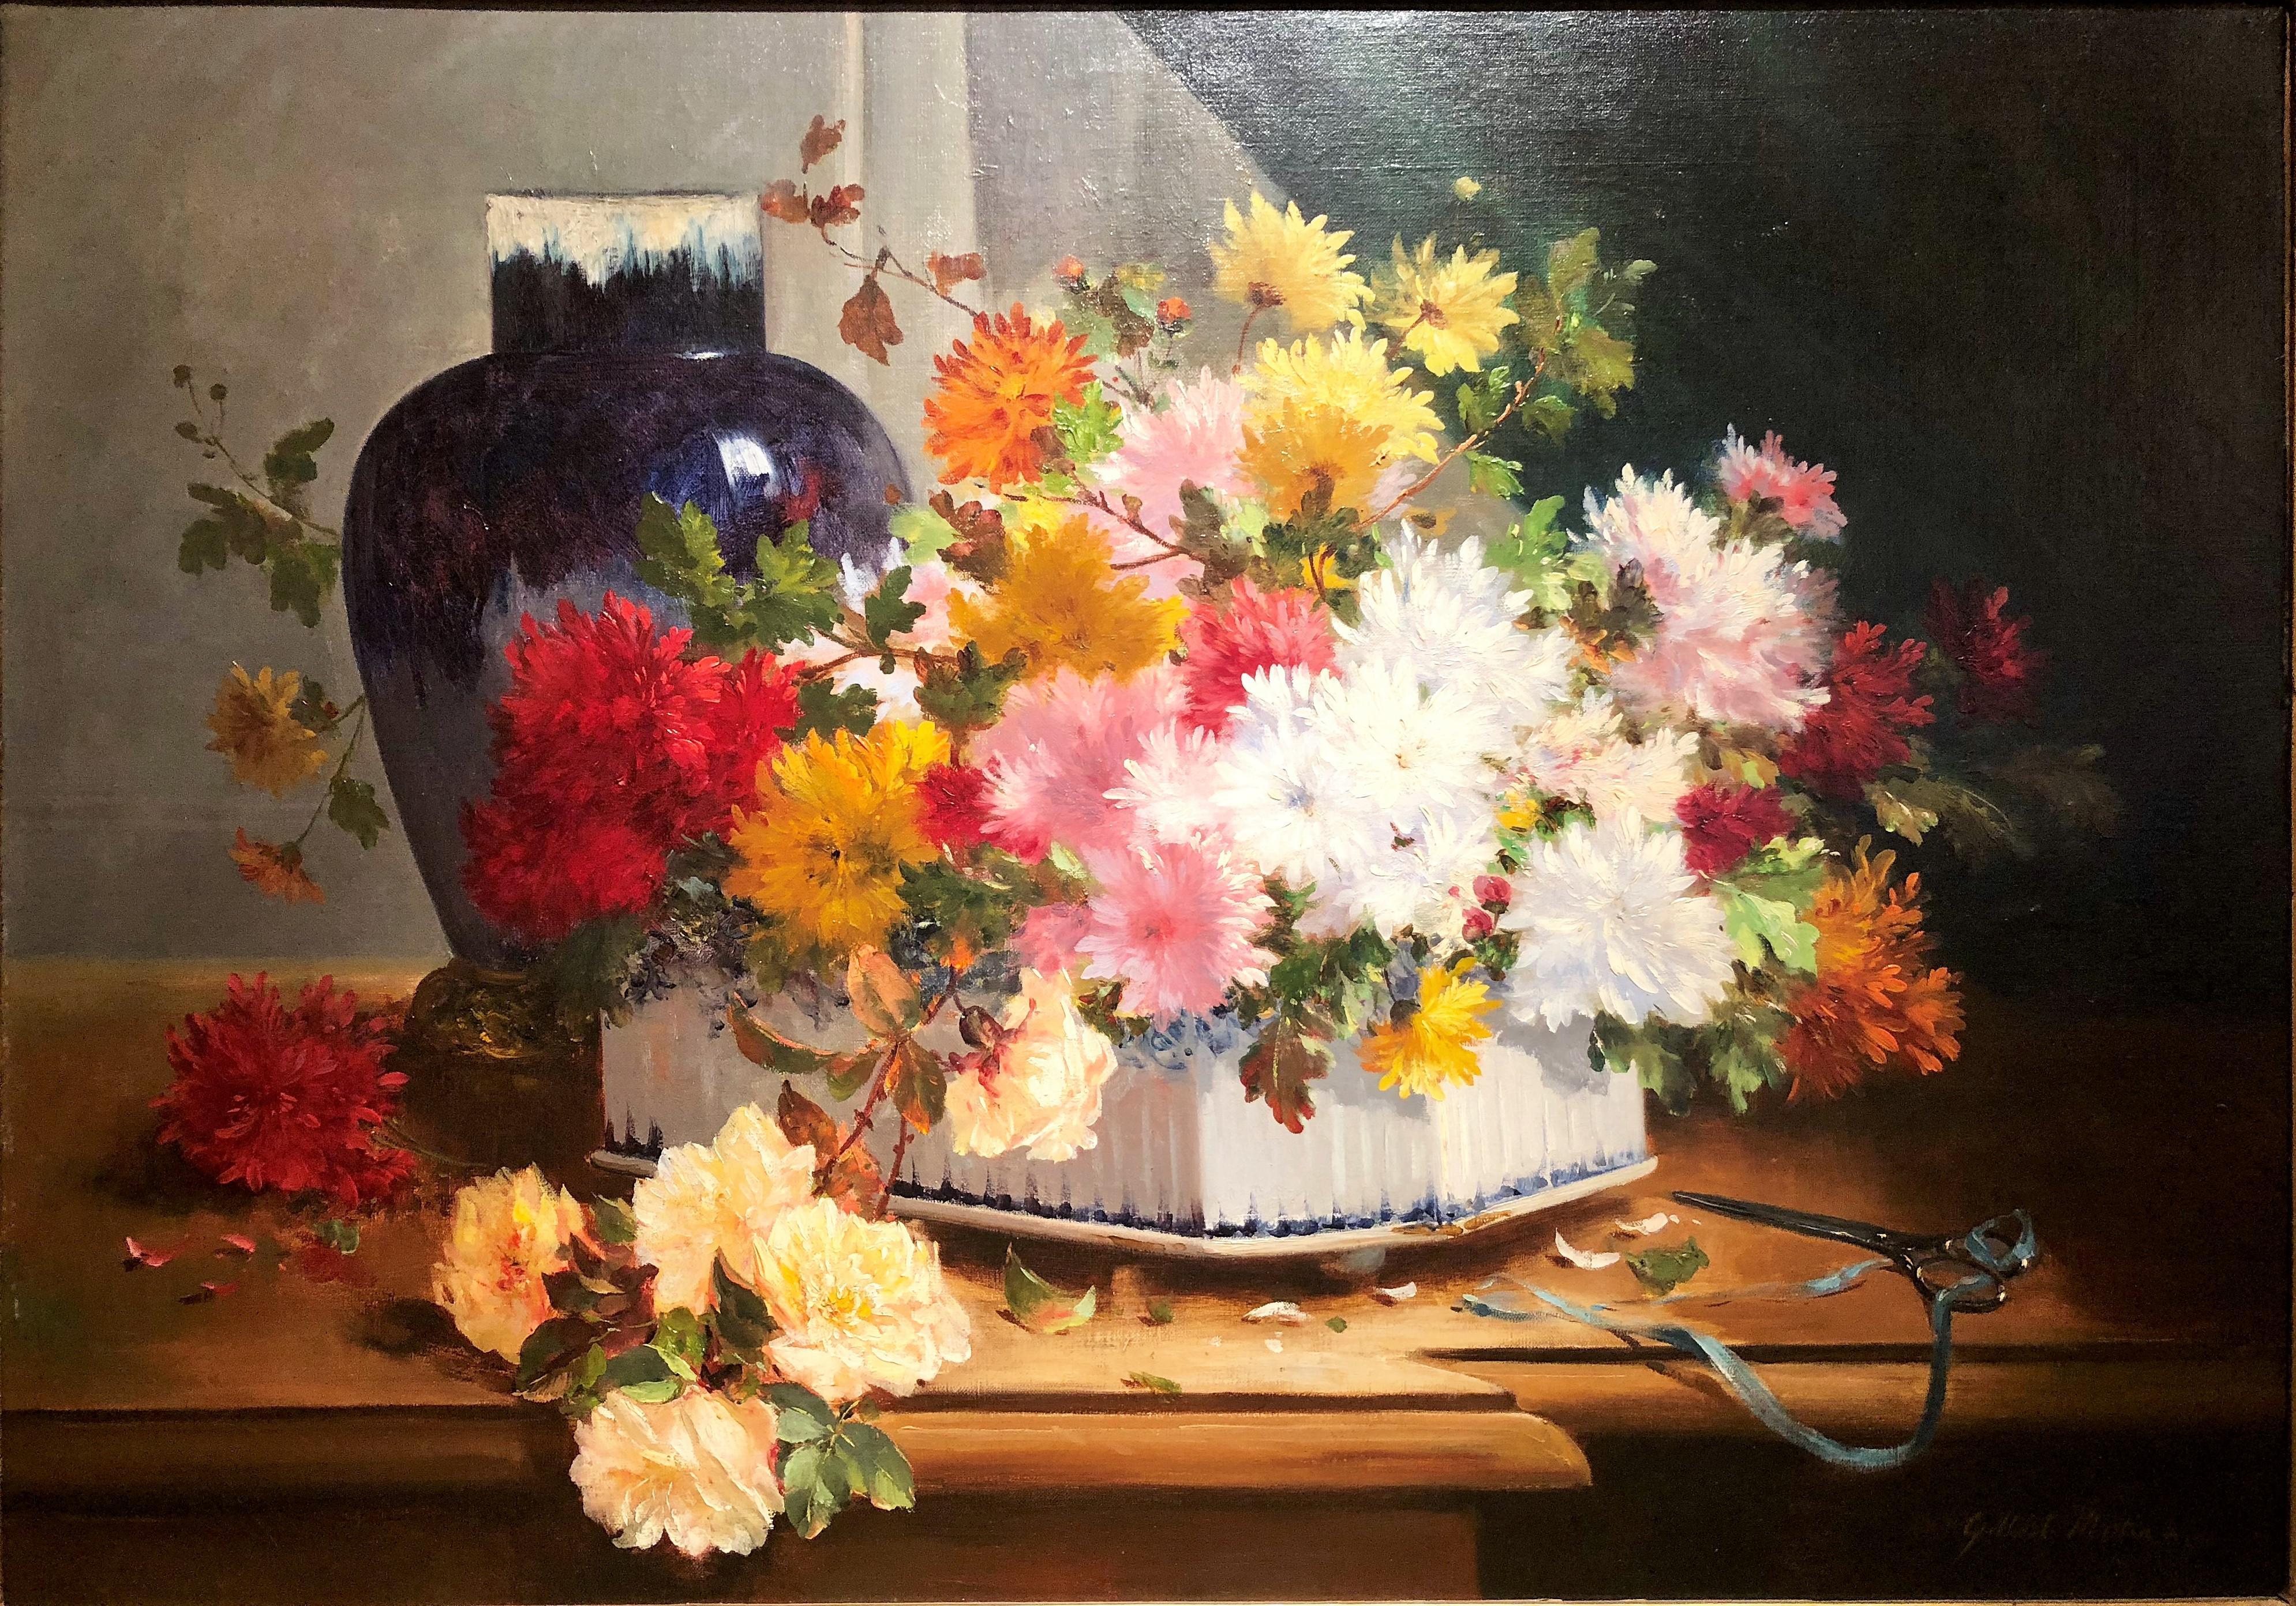 This floral still life was painted by Charles Gilbert Martin (1839-1905). It is signed in the lower right corner.